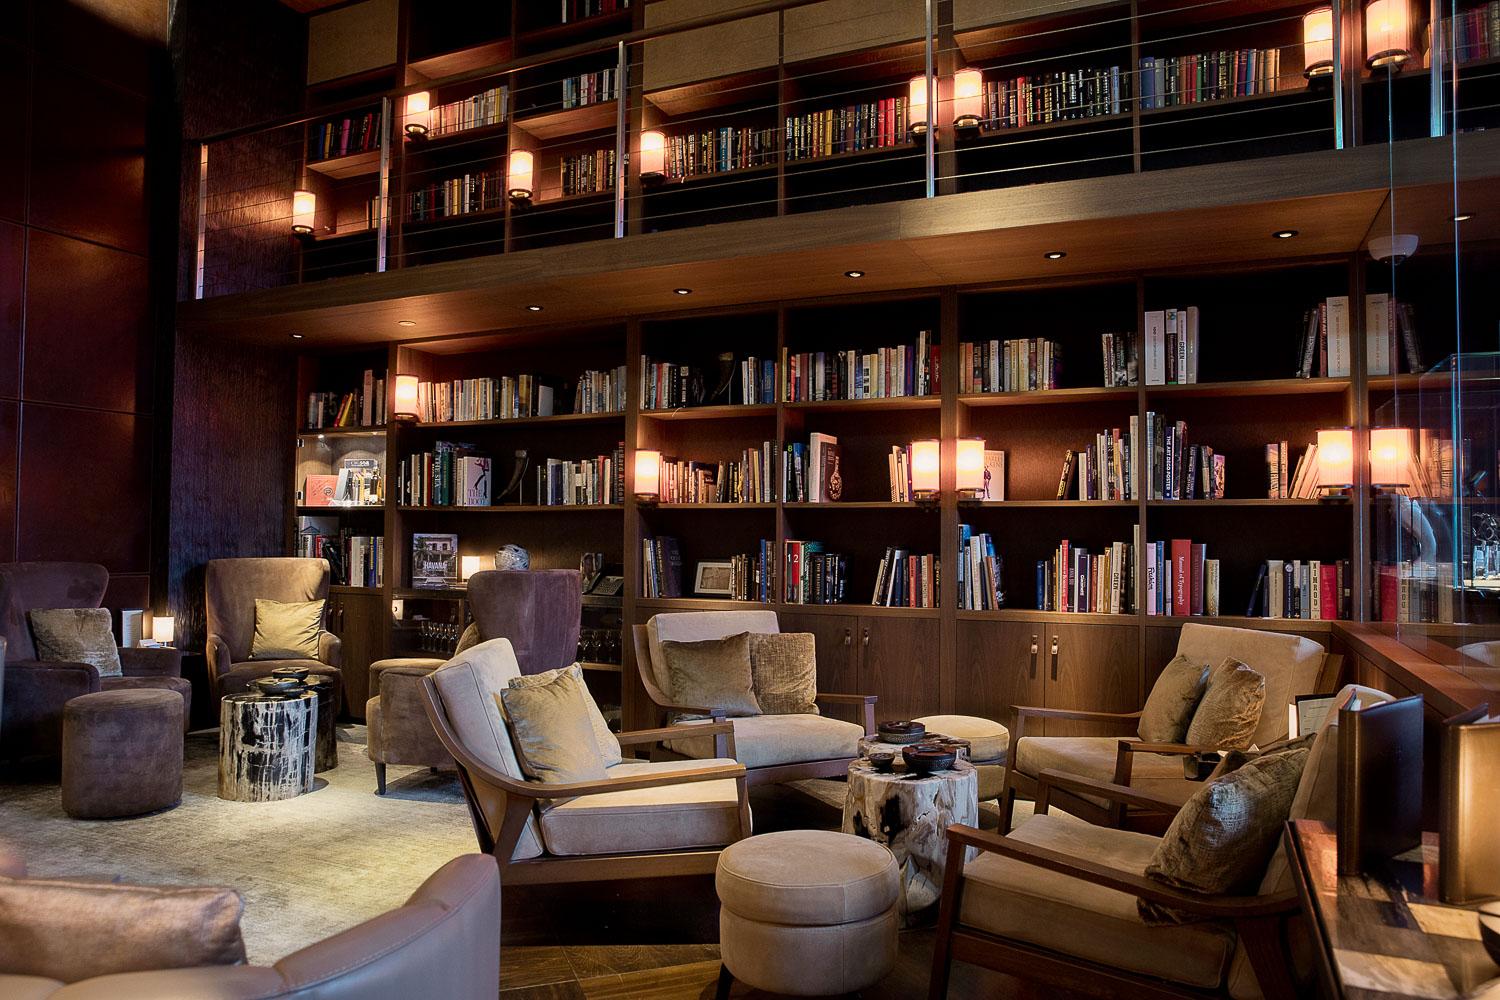 The Chedi Andermatt The Chedi’s cigar room offers the largest hotel collection of cigars in the world